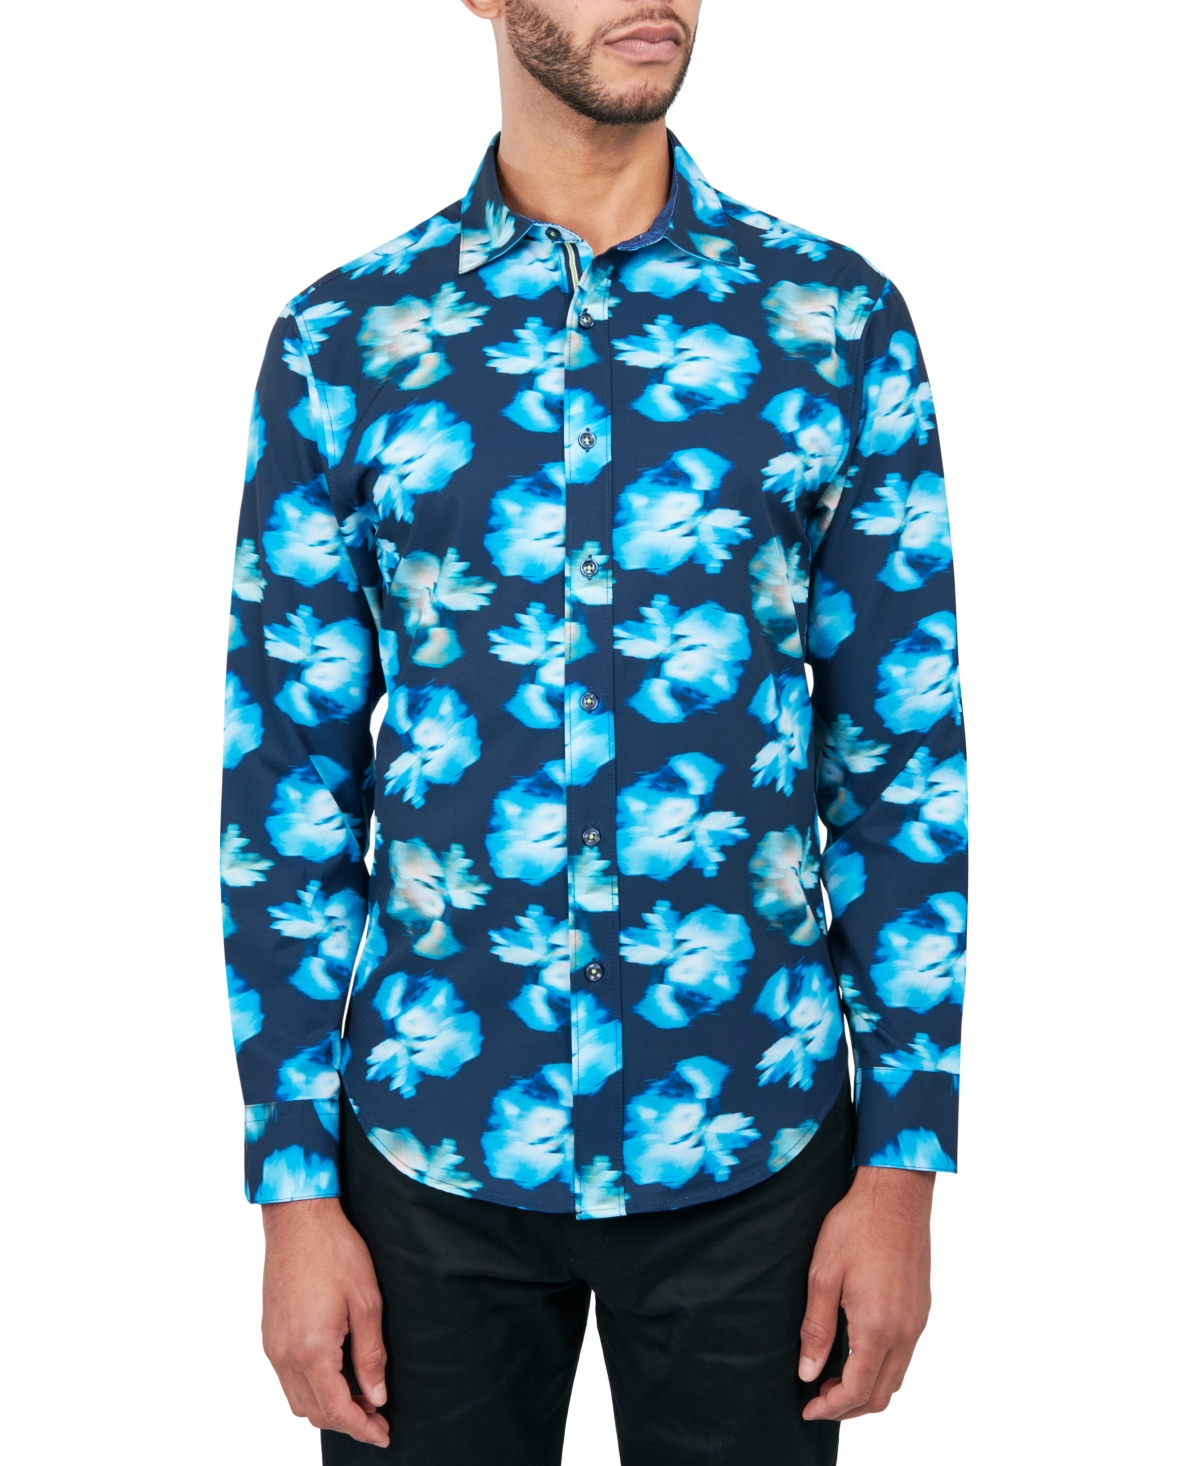 Men's Regular-Fit Non-Iron Performance Stretch Abstract Floral Button-Down Shirt - Blue